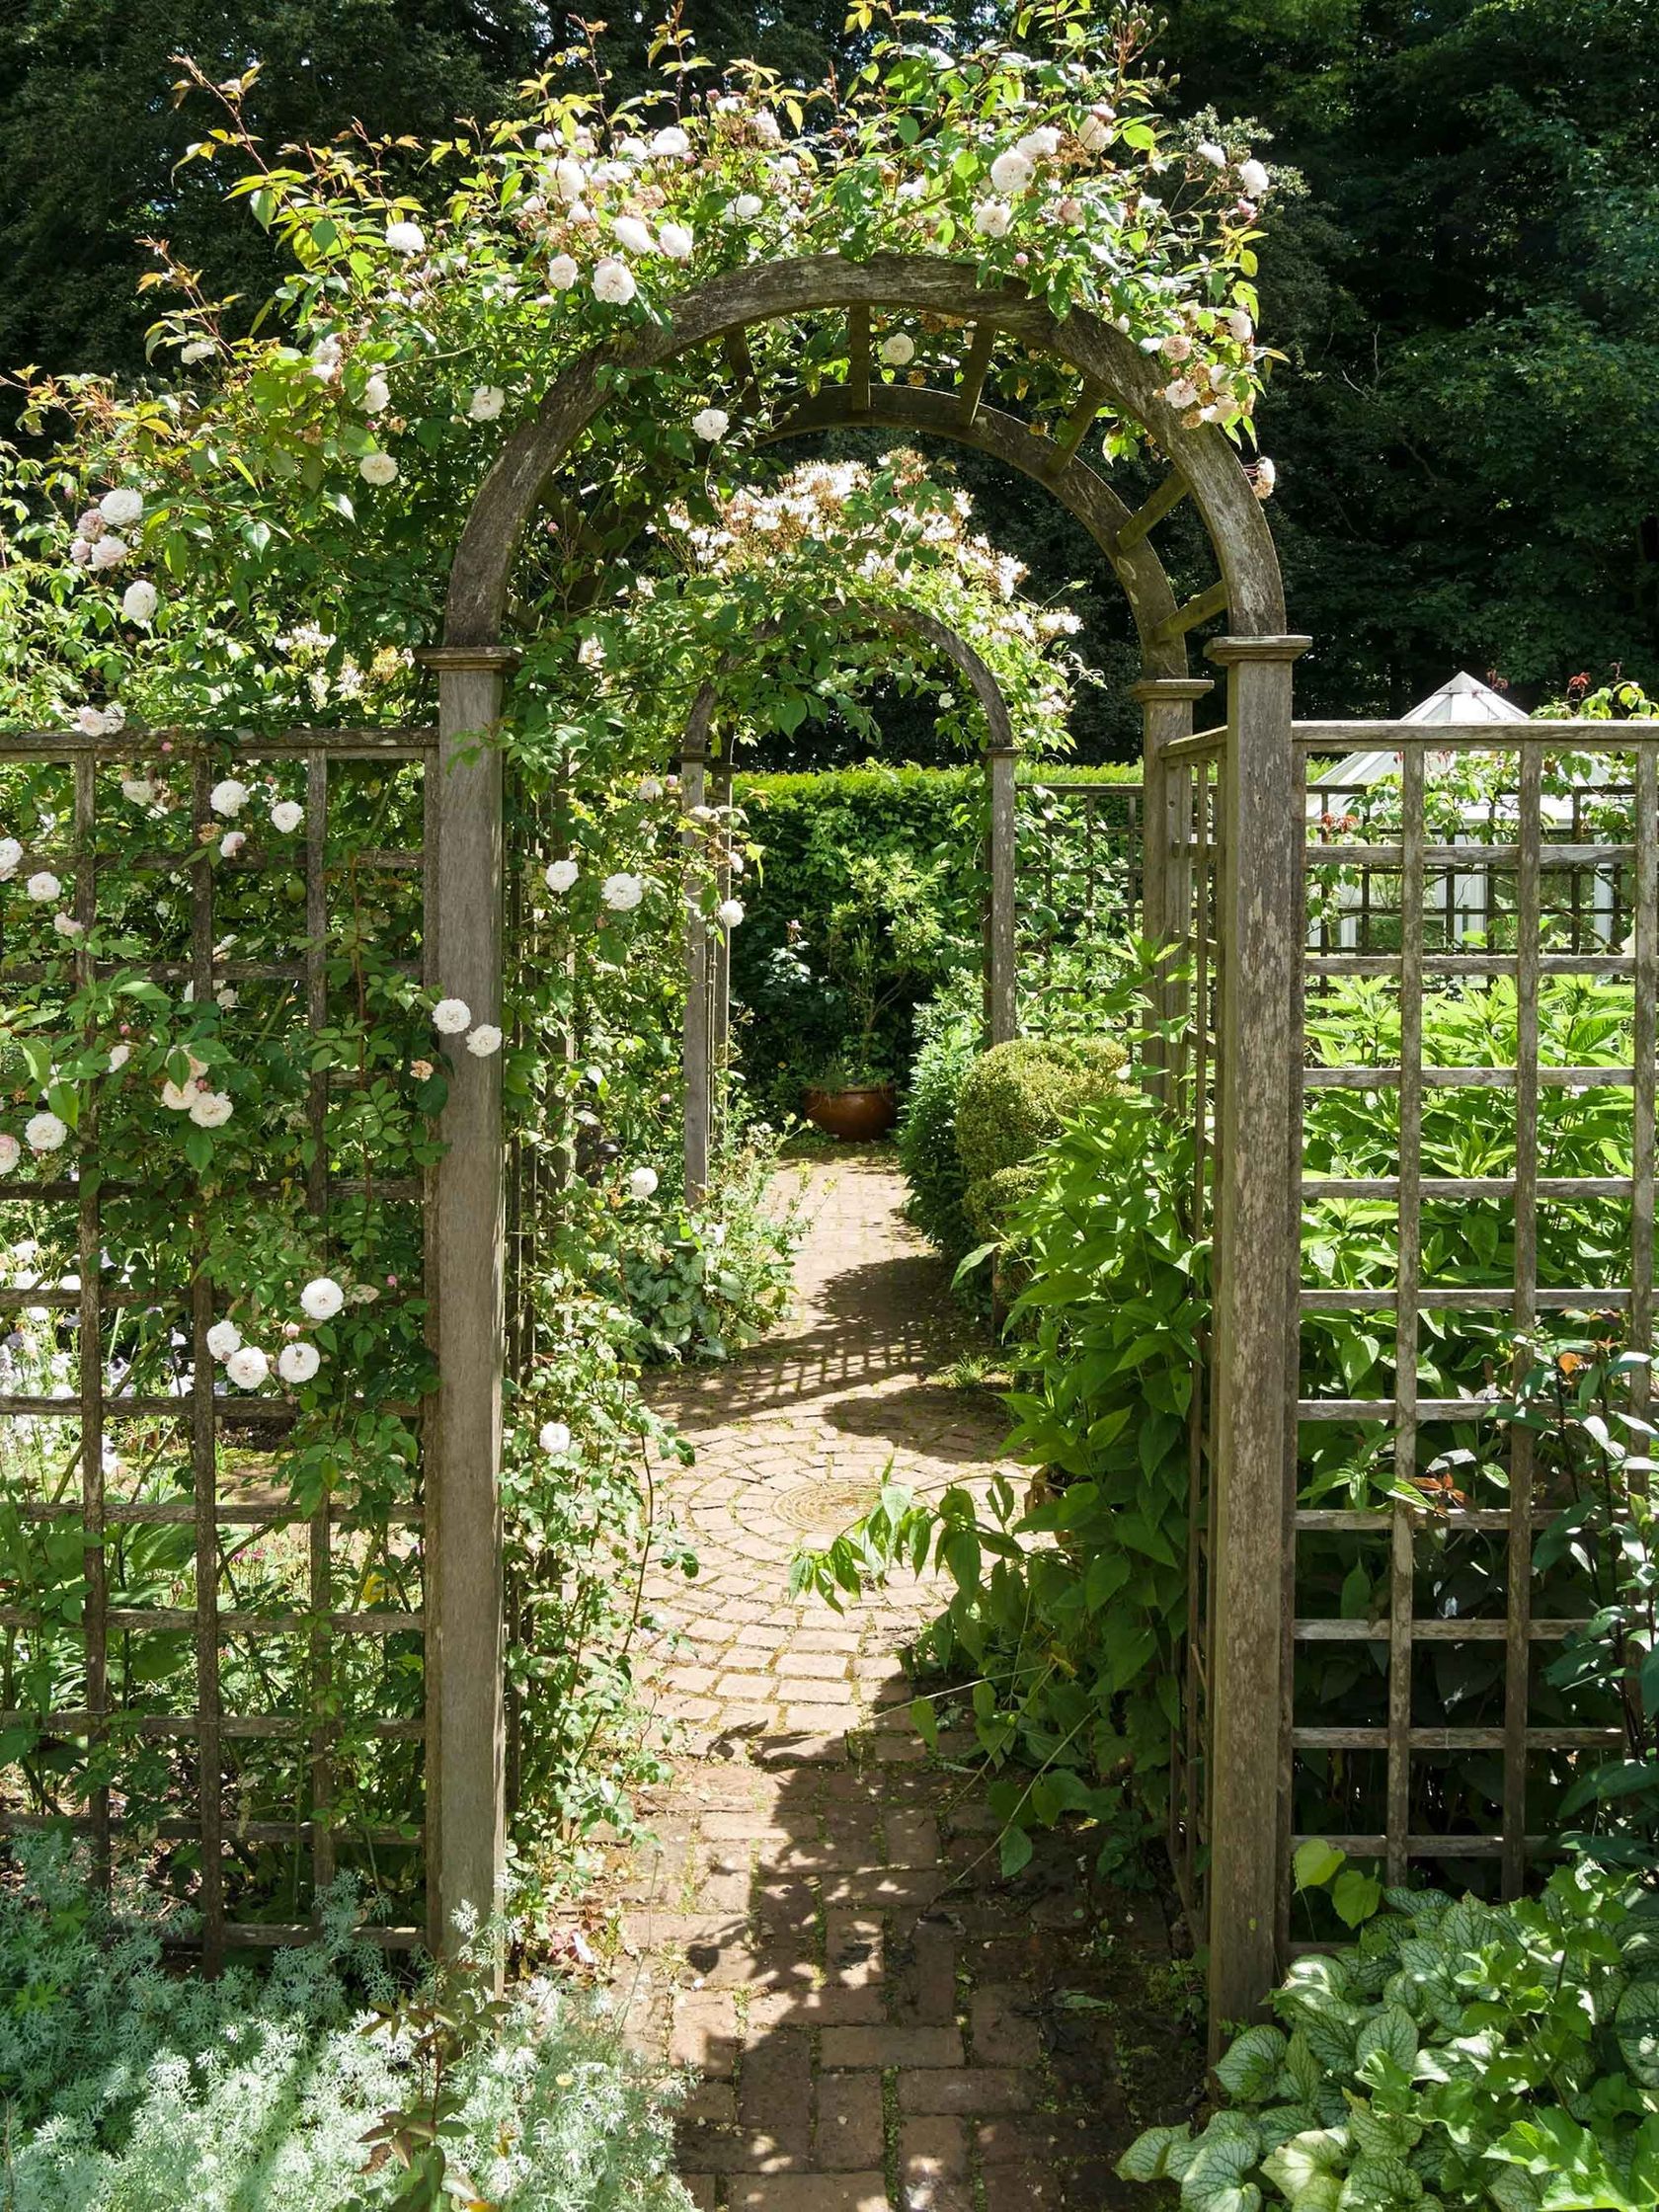 Trellis ideas for gardens: 15 chic screens to add plants, privacy and